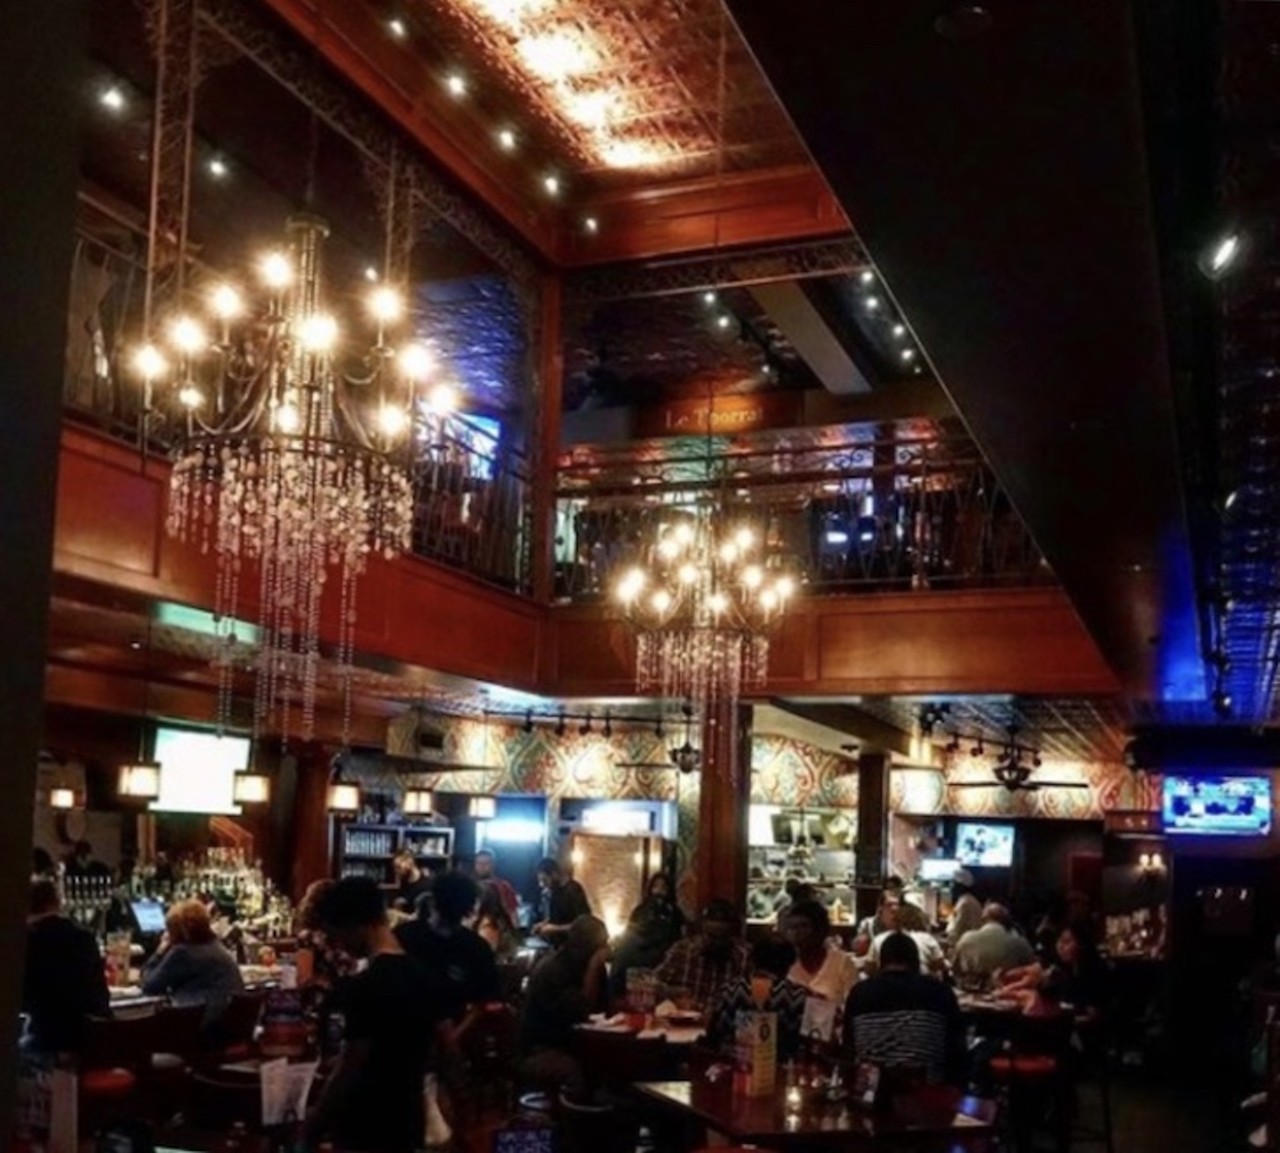 The Bourbon Street Barrel Room
2393 Professor Ave., 216-298-4400
Choice quote: &#147;New Orleans has been on my list of travel destinations for a while - until the day comes, the BSBR will fill the NOLA sized hole in my heart.&#148; -Angela M. 
Photo via biv/Instagram